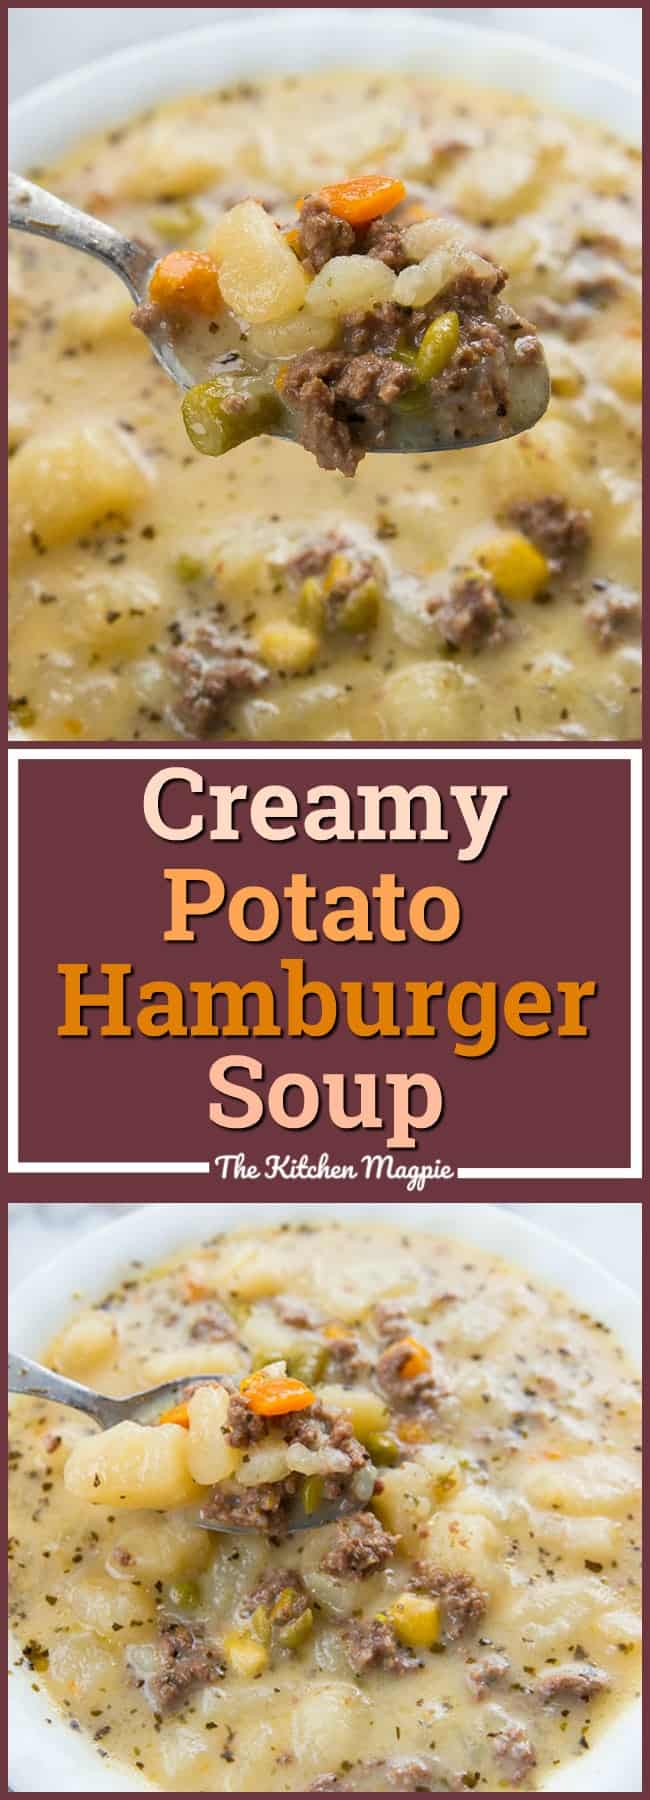 Creamy Potato and Hamburger soup! This hamburger soup is the perfect way to warm up this winter! You can make it in the crockpot or stove top! From @kitchenmagpie 